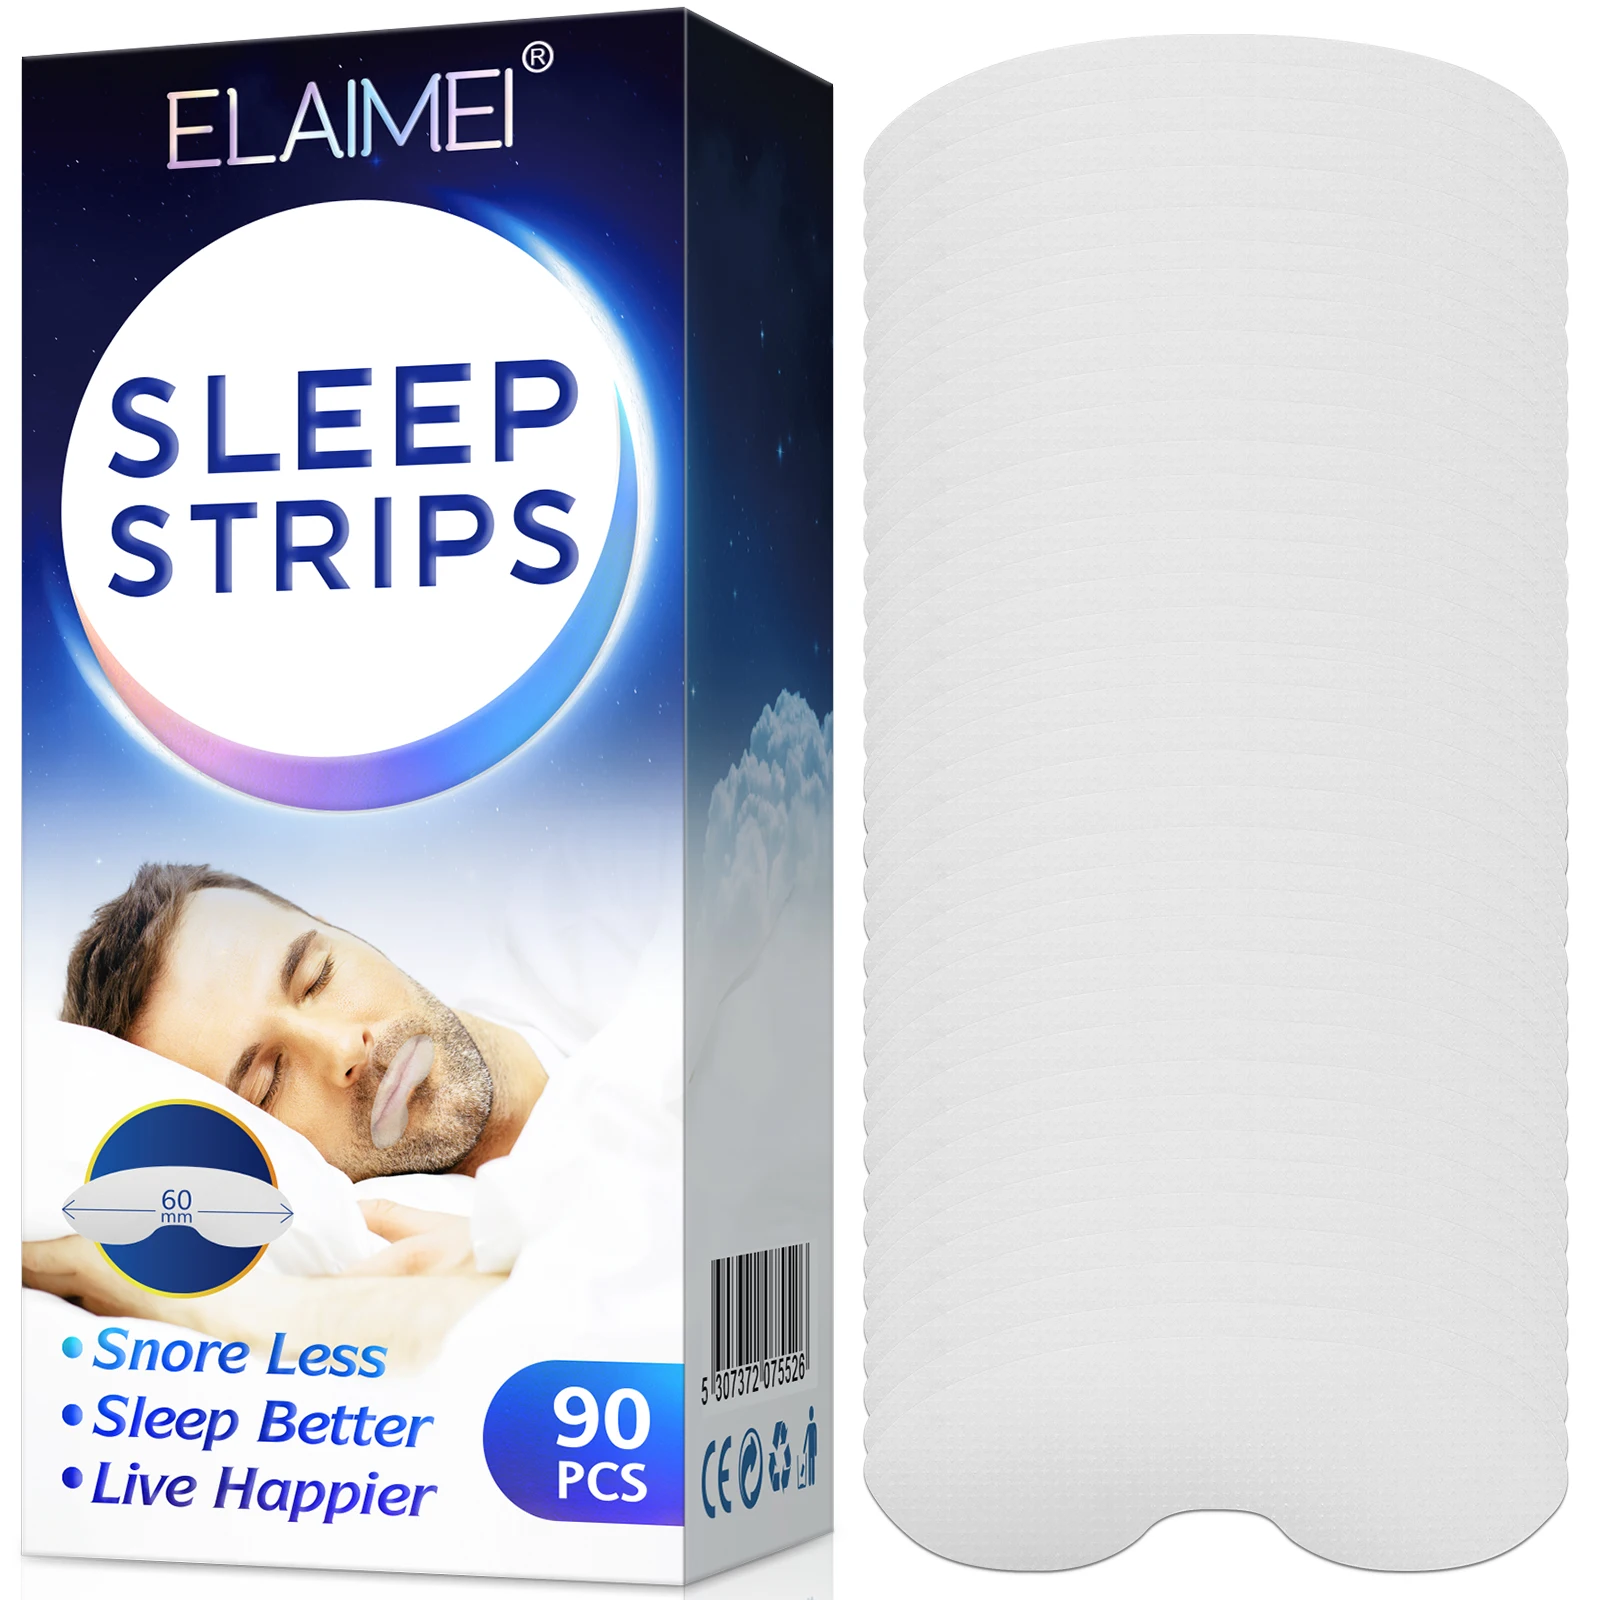 

ELAIMEI private label sleep strips lip shape improves sleep relieves snoring mouth tape sleep stripsanti snore mouth tape